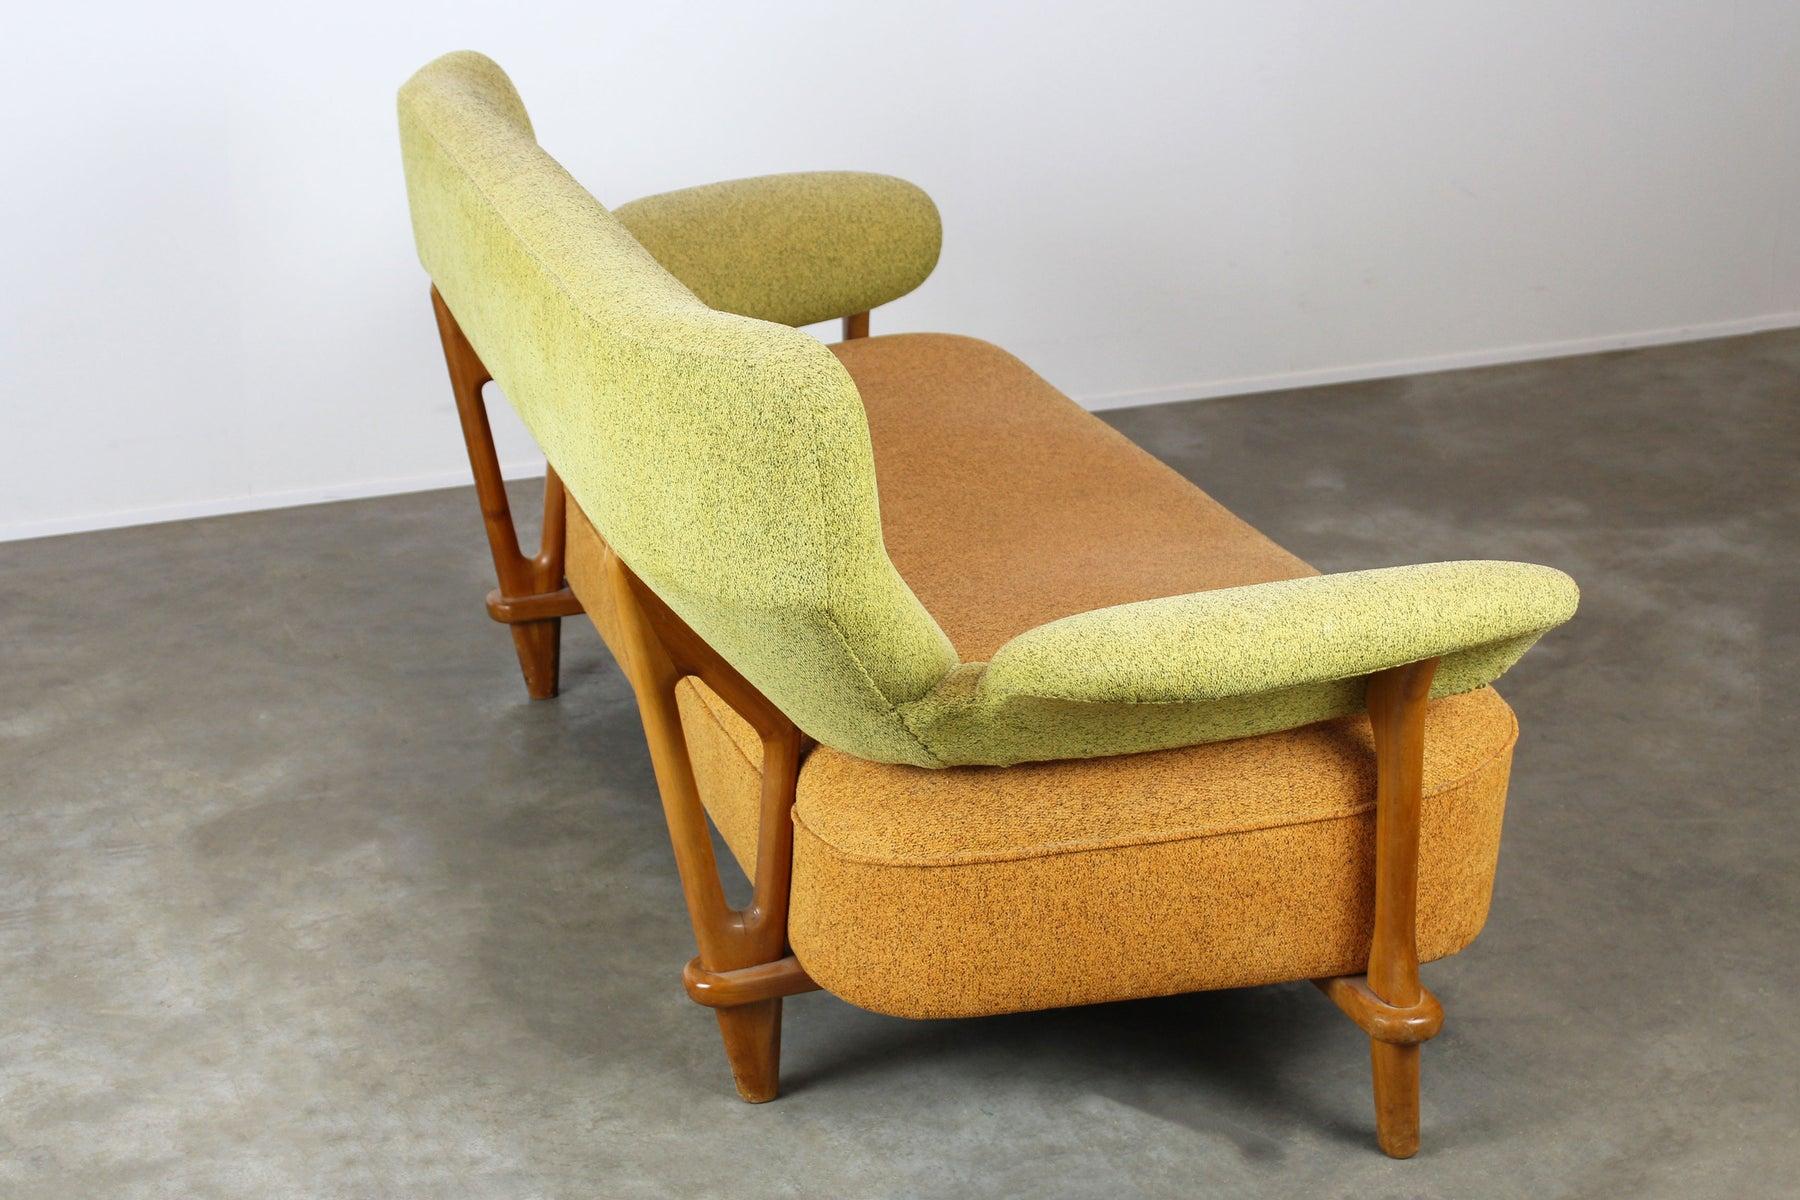 Rare Dutch Design sofa by Theo Ruth F109 for Artifort 1950 Mid-Century Modern For Sale 2